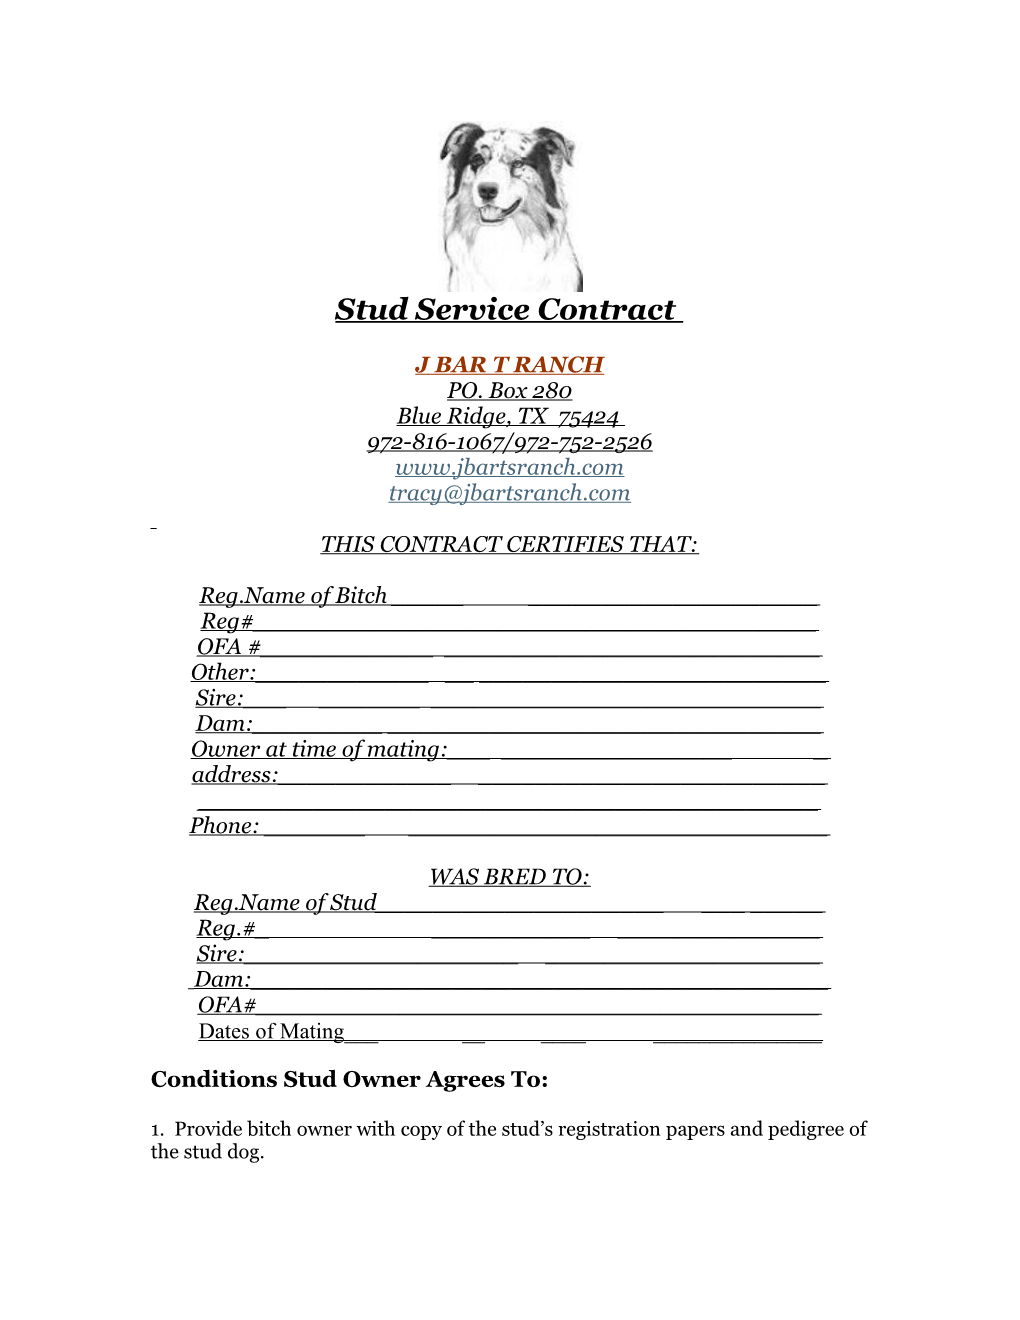 Stud Service Contract